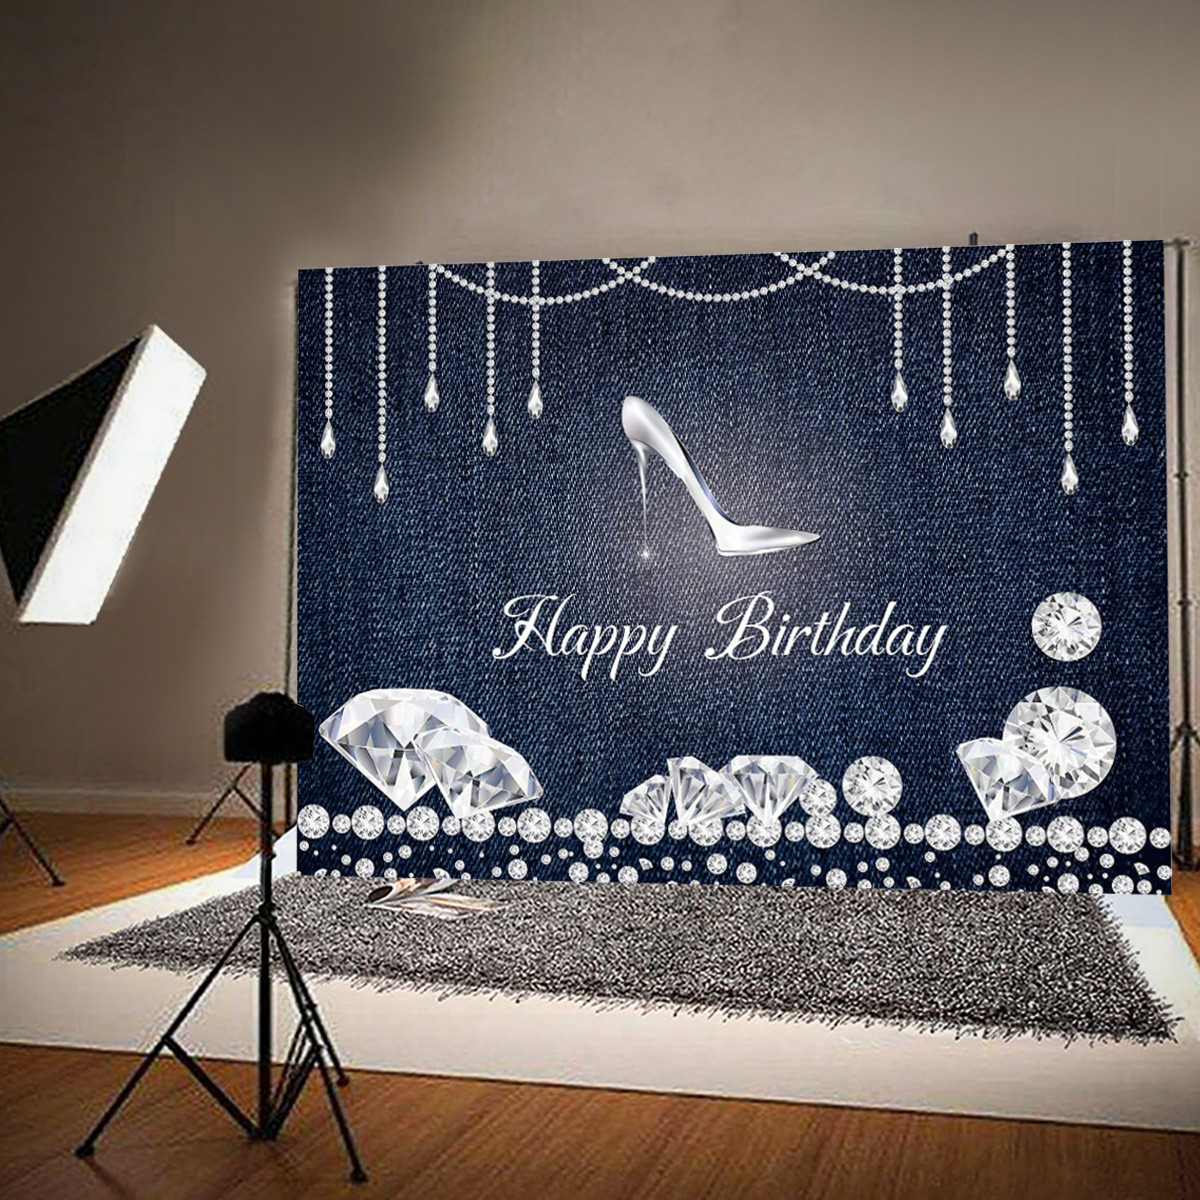 Happy-Birthday-Photography-Backdrop-Photo-Background-Studio-Home-Party-Decor-Props-1821552-6